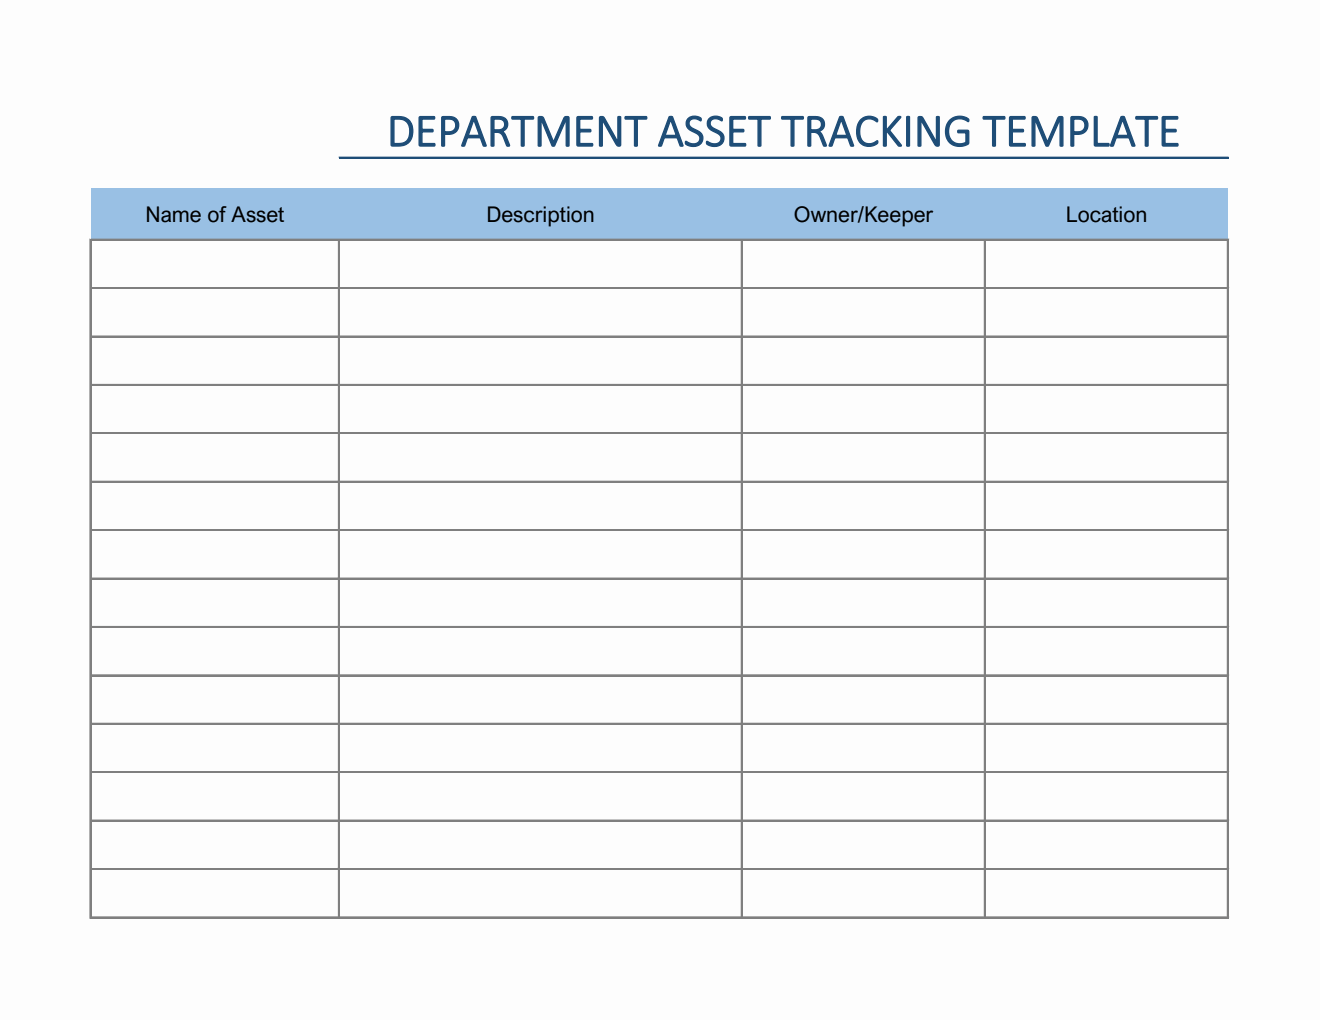 Department Asset Tracking Template in Excel